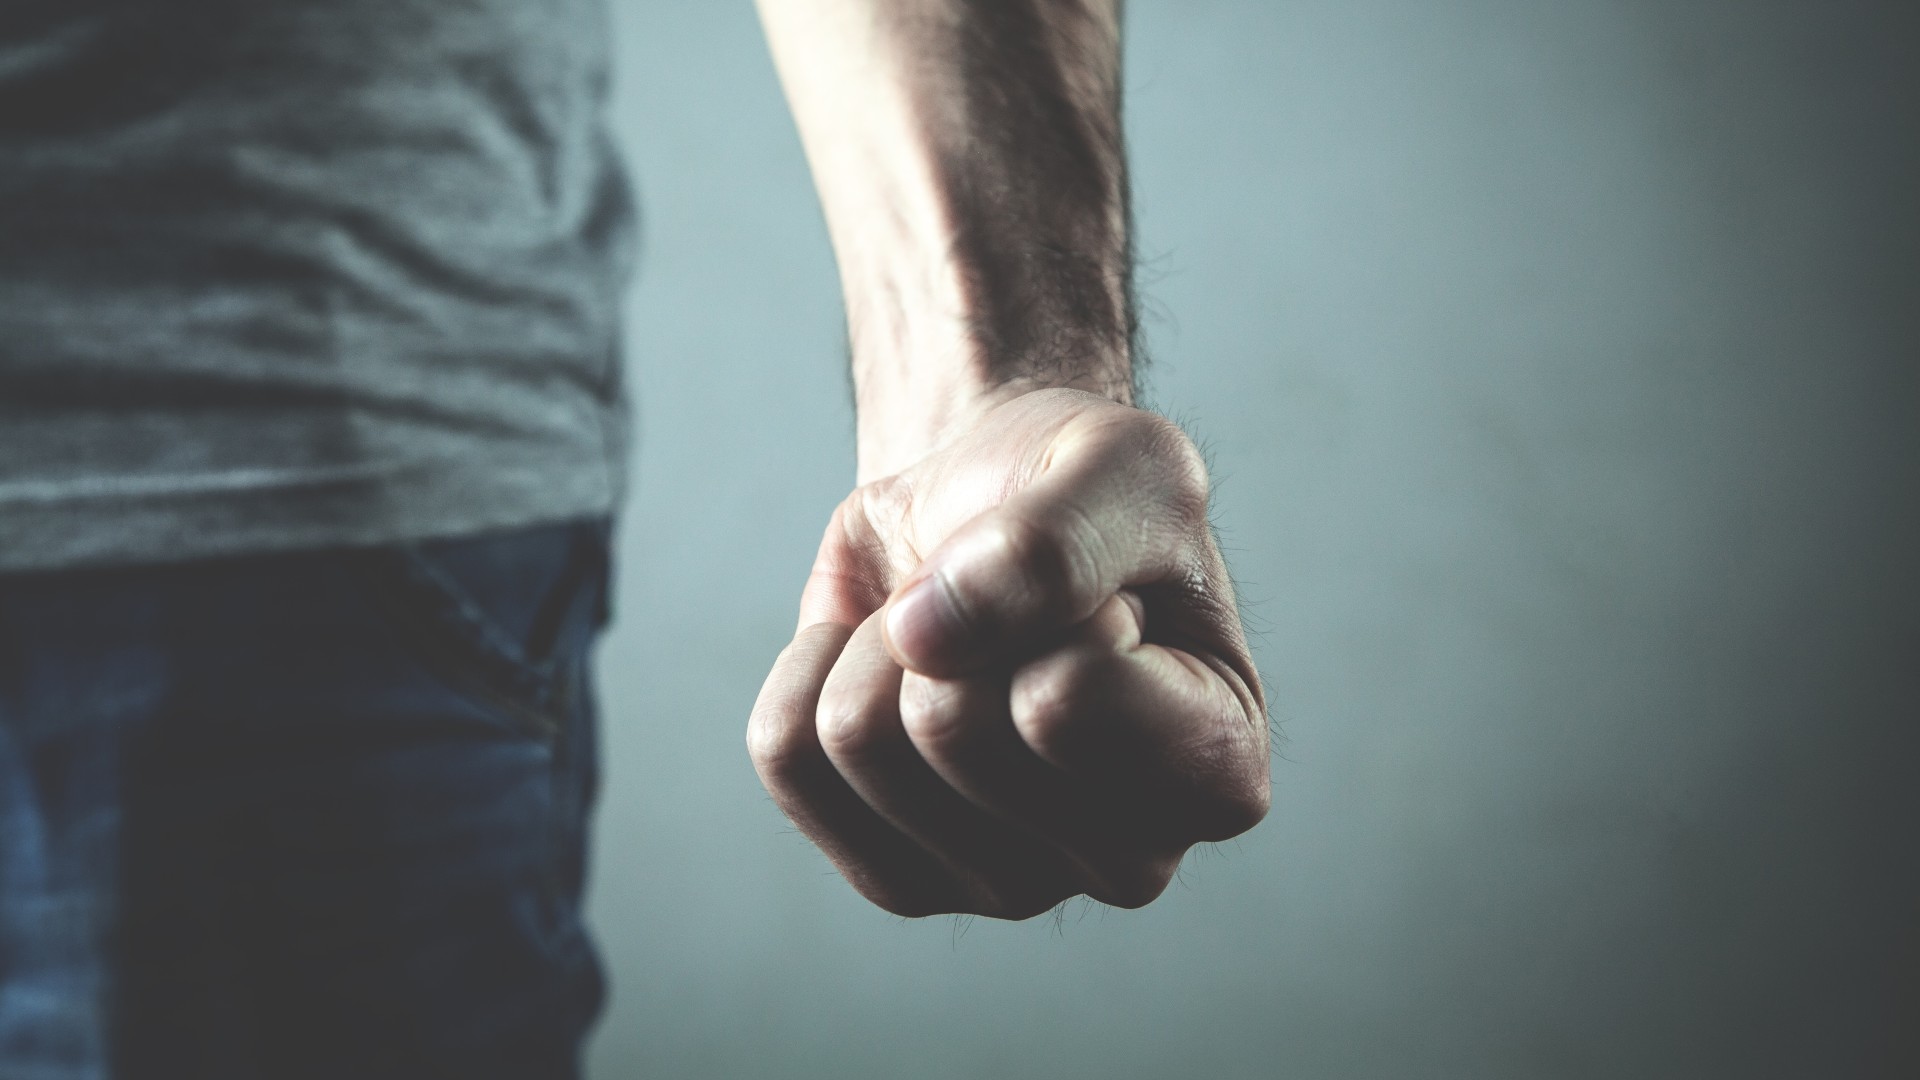 Close up of Caucasian man's angry, clenched fist